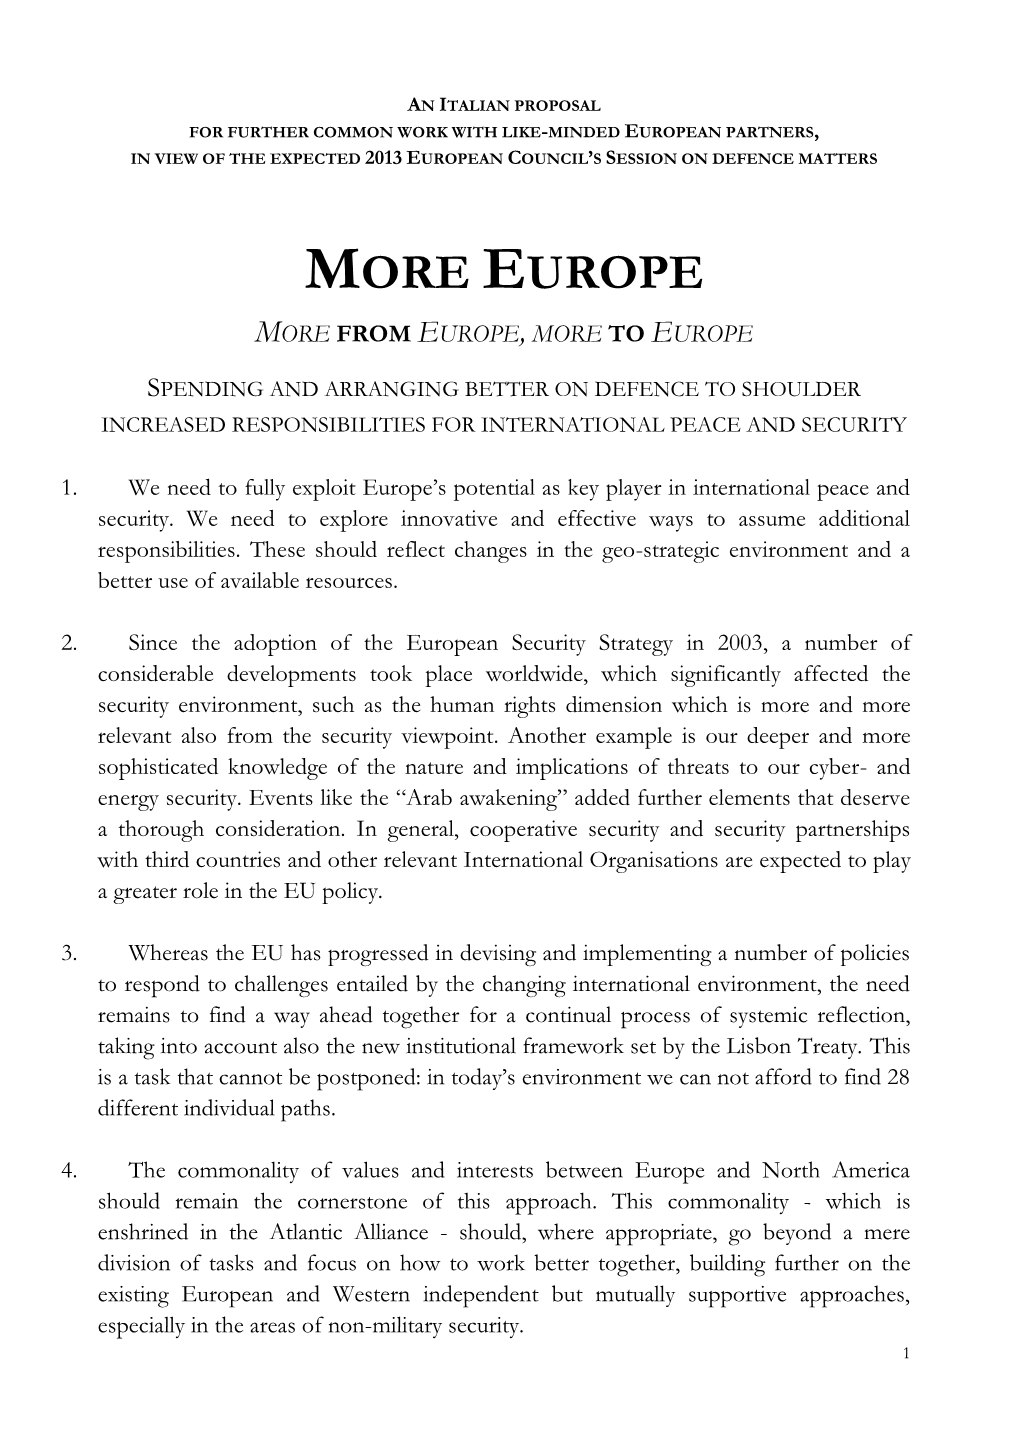 European Partners, in View of the Expected 2013 European Council’S Session on Defence Matters